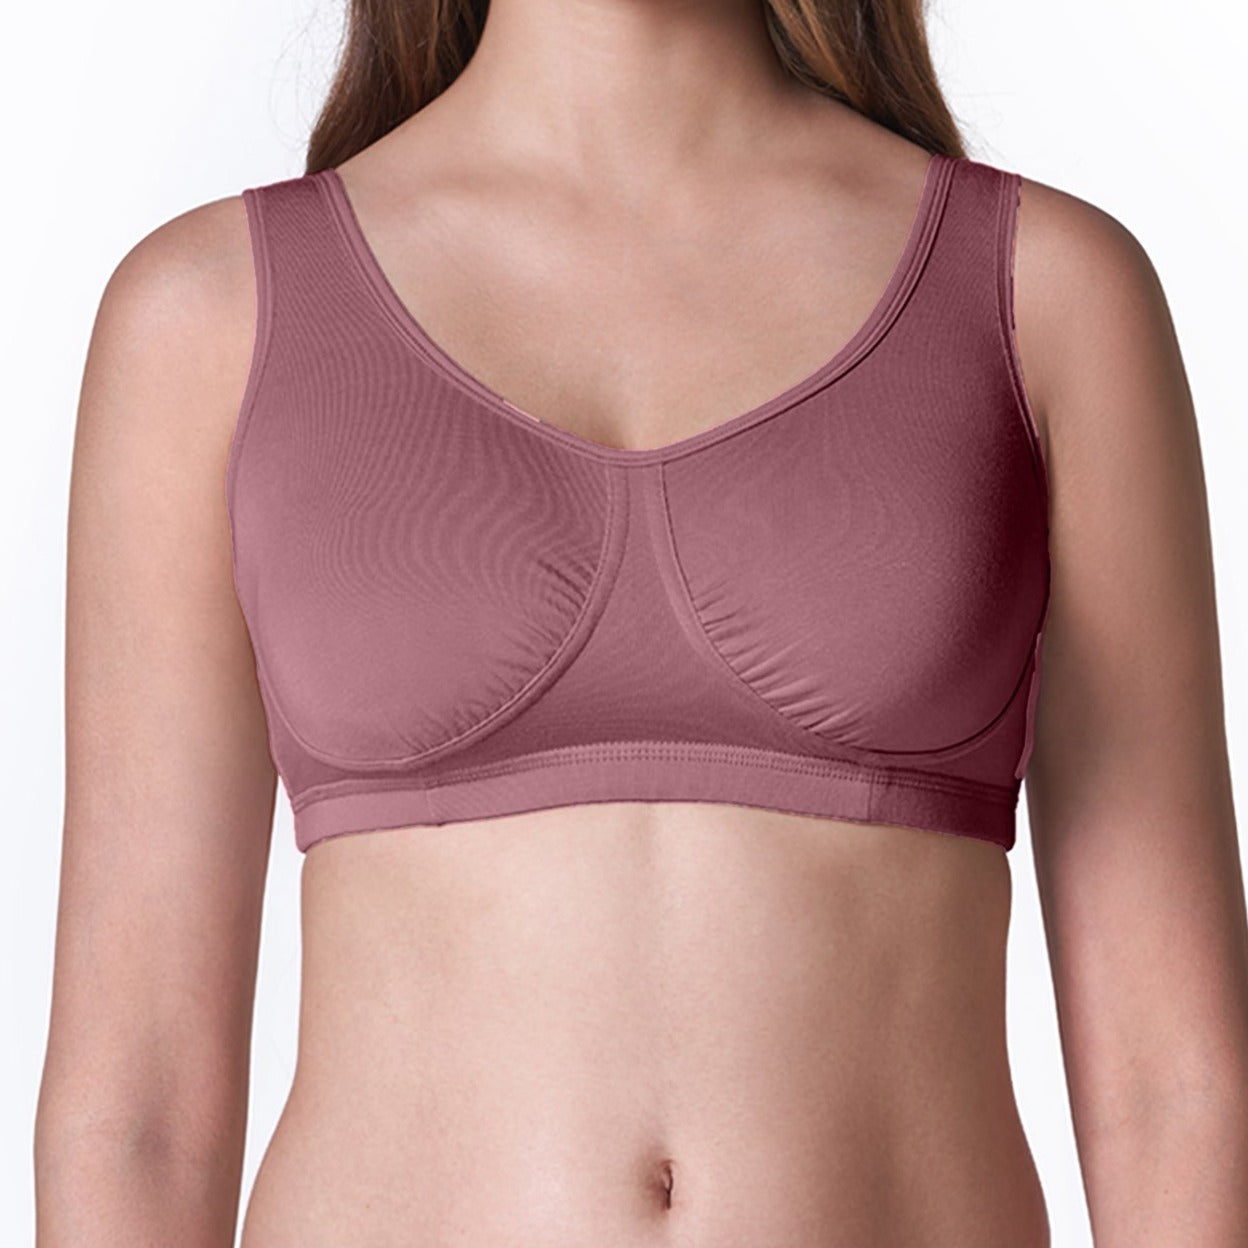 Blossom Inners - Introducing Night Bra! Crafted to enhance ease